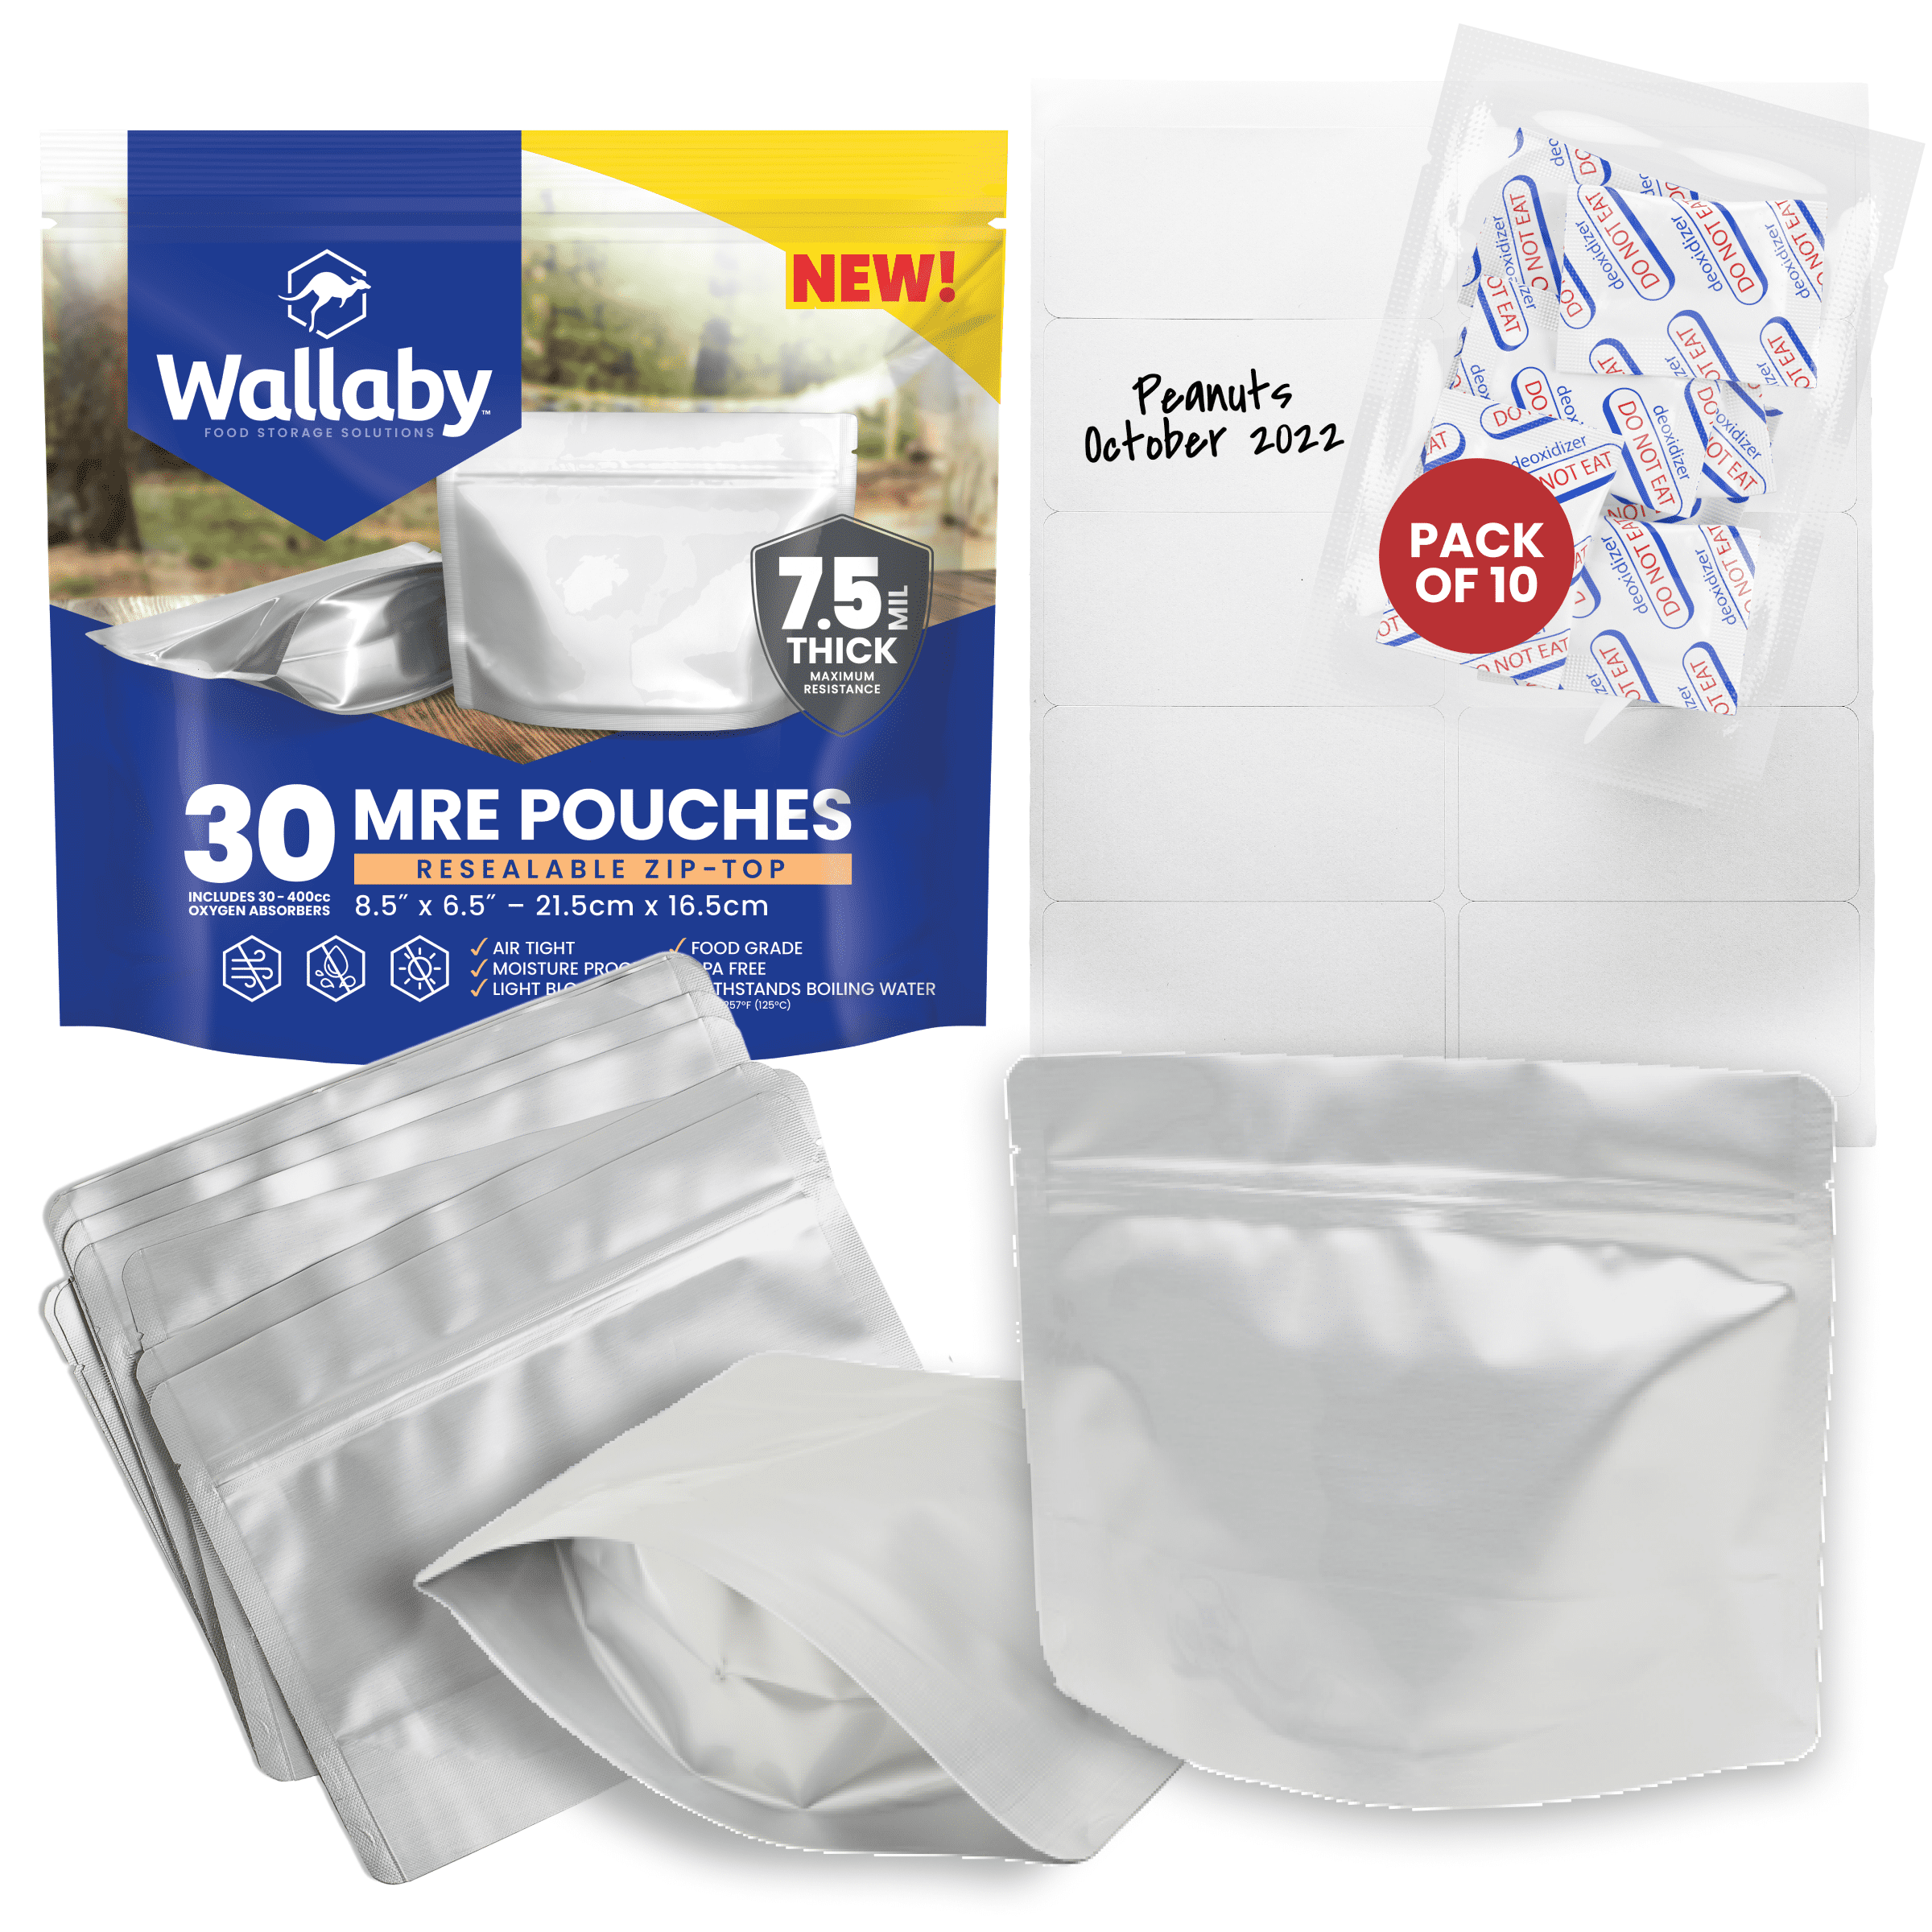 100 Pcs 1 Quart Mylar Bags for Food Storage with Oxygen Absorbers 300cc -  Smell Proof Mylar bags 1 Quart - Stand-Up Zipper Pouches 7.5 x 11.5 -  Small Mylar Ziplock Bags